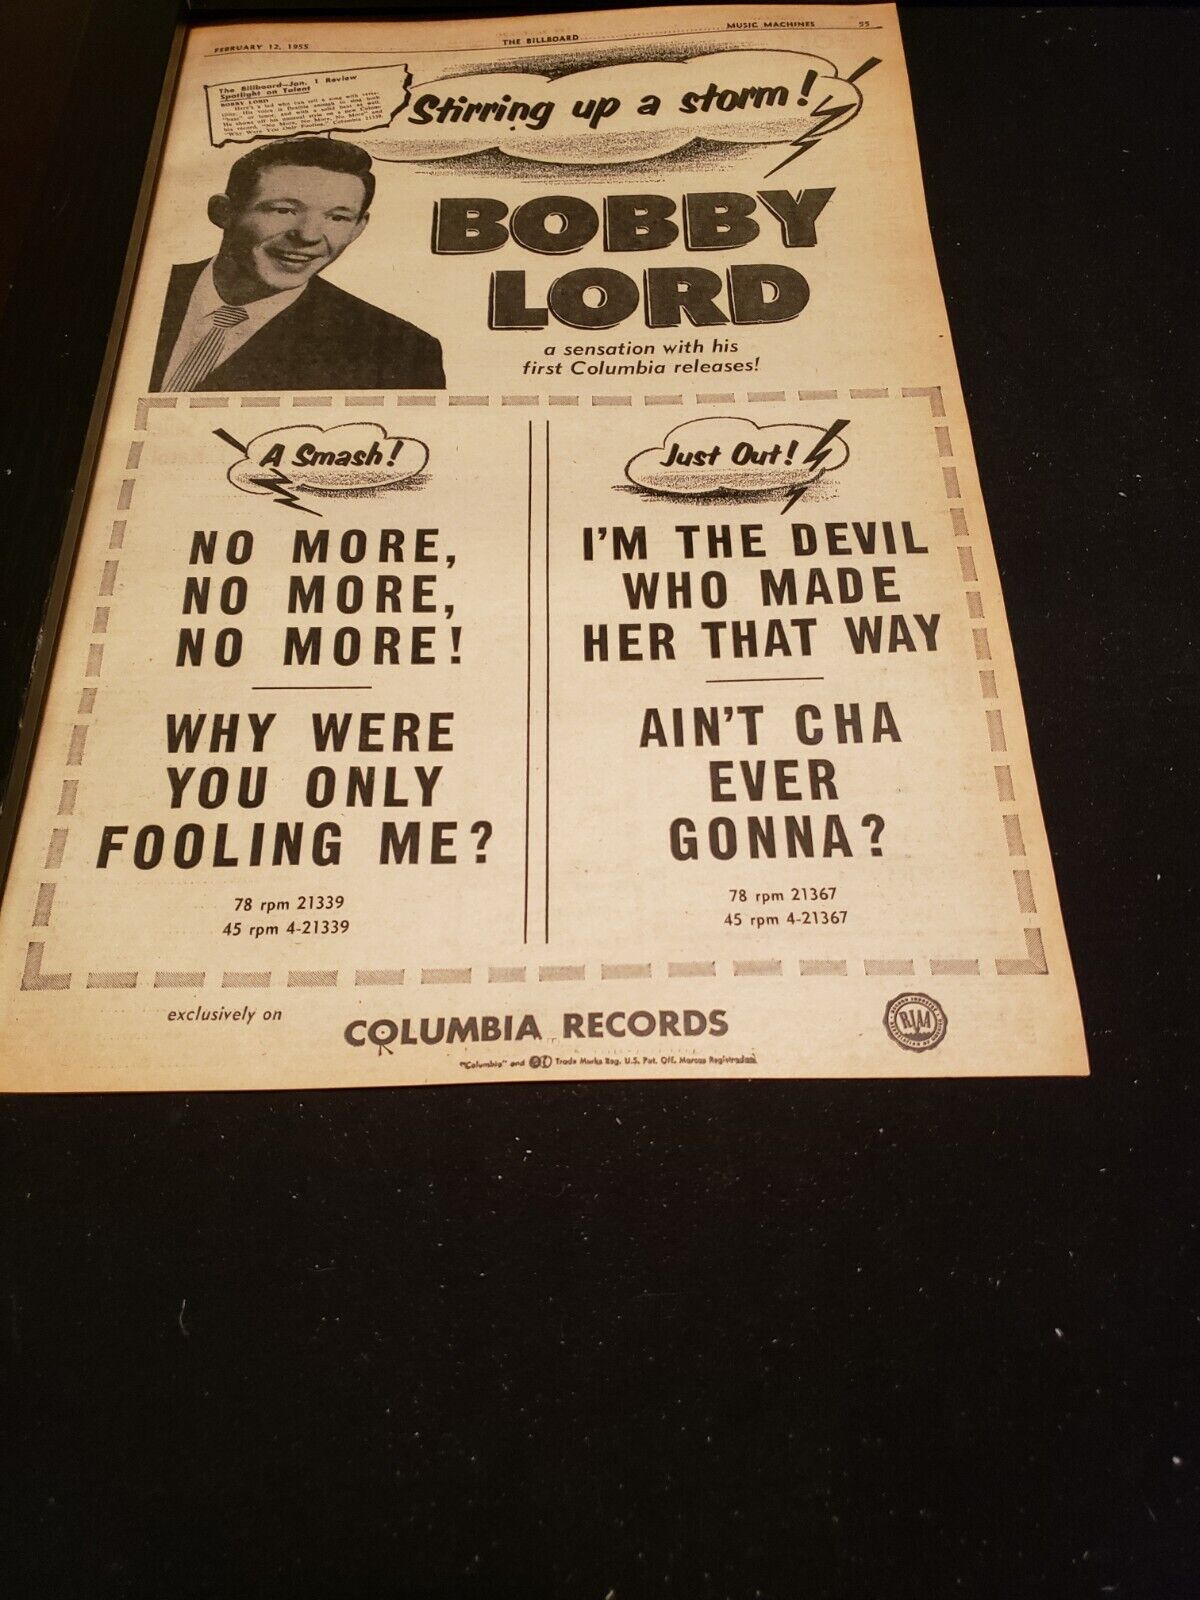 Bobby Lord Rare Original Columbia Records Promo Poster Ad Framed!